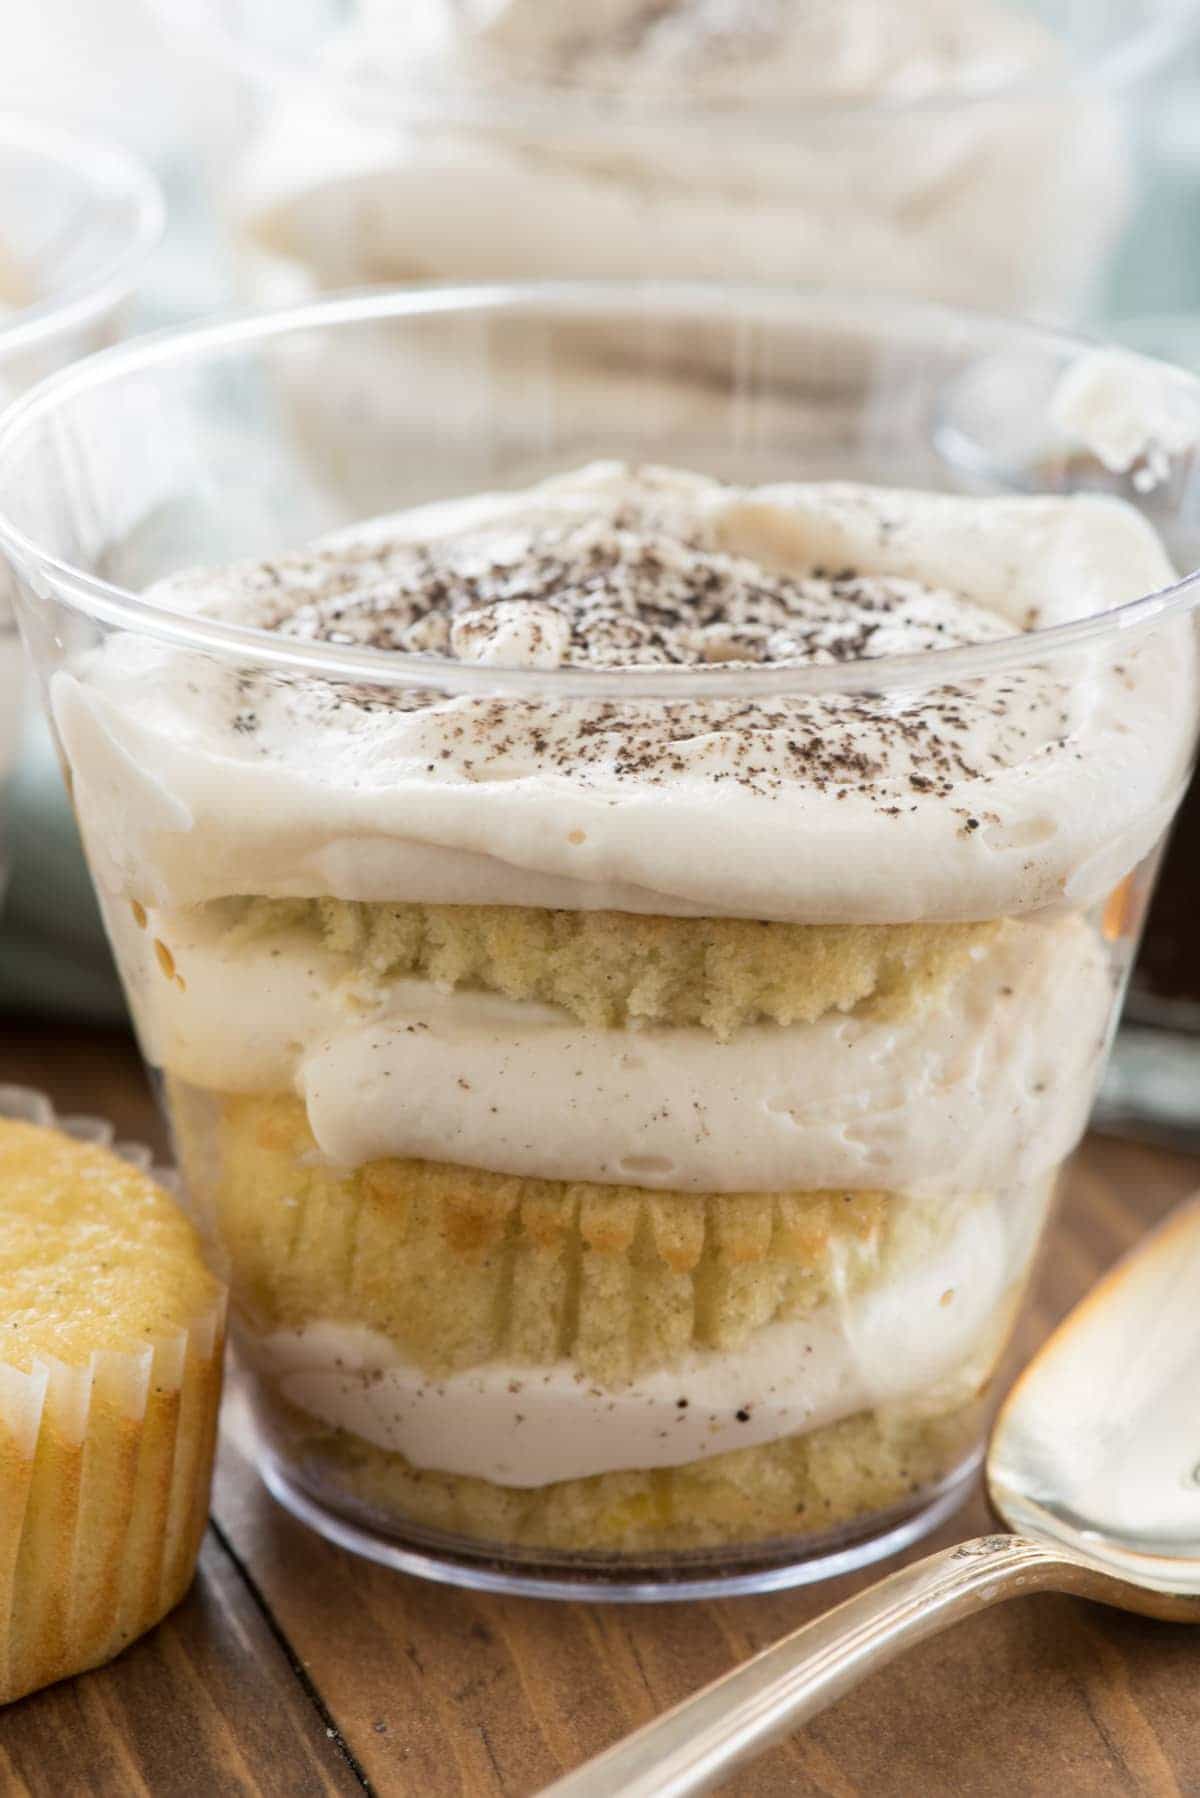 Easy Tiramisu Cups to go - this easy recipe uses simple ingredients you already have at home! Make it in plastic cups for the perfect potluck dessert! Everyone loves these at parties.